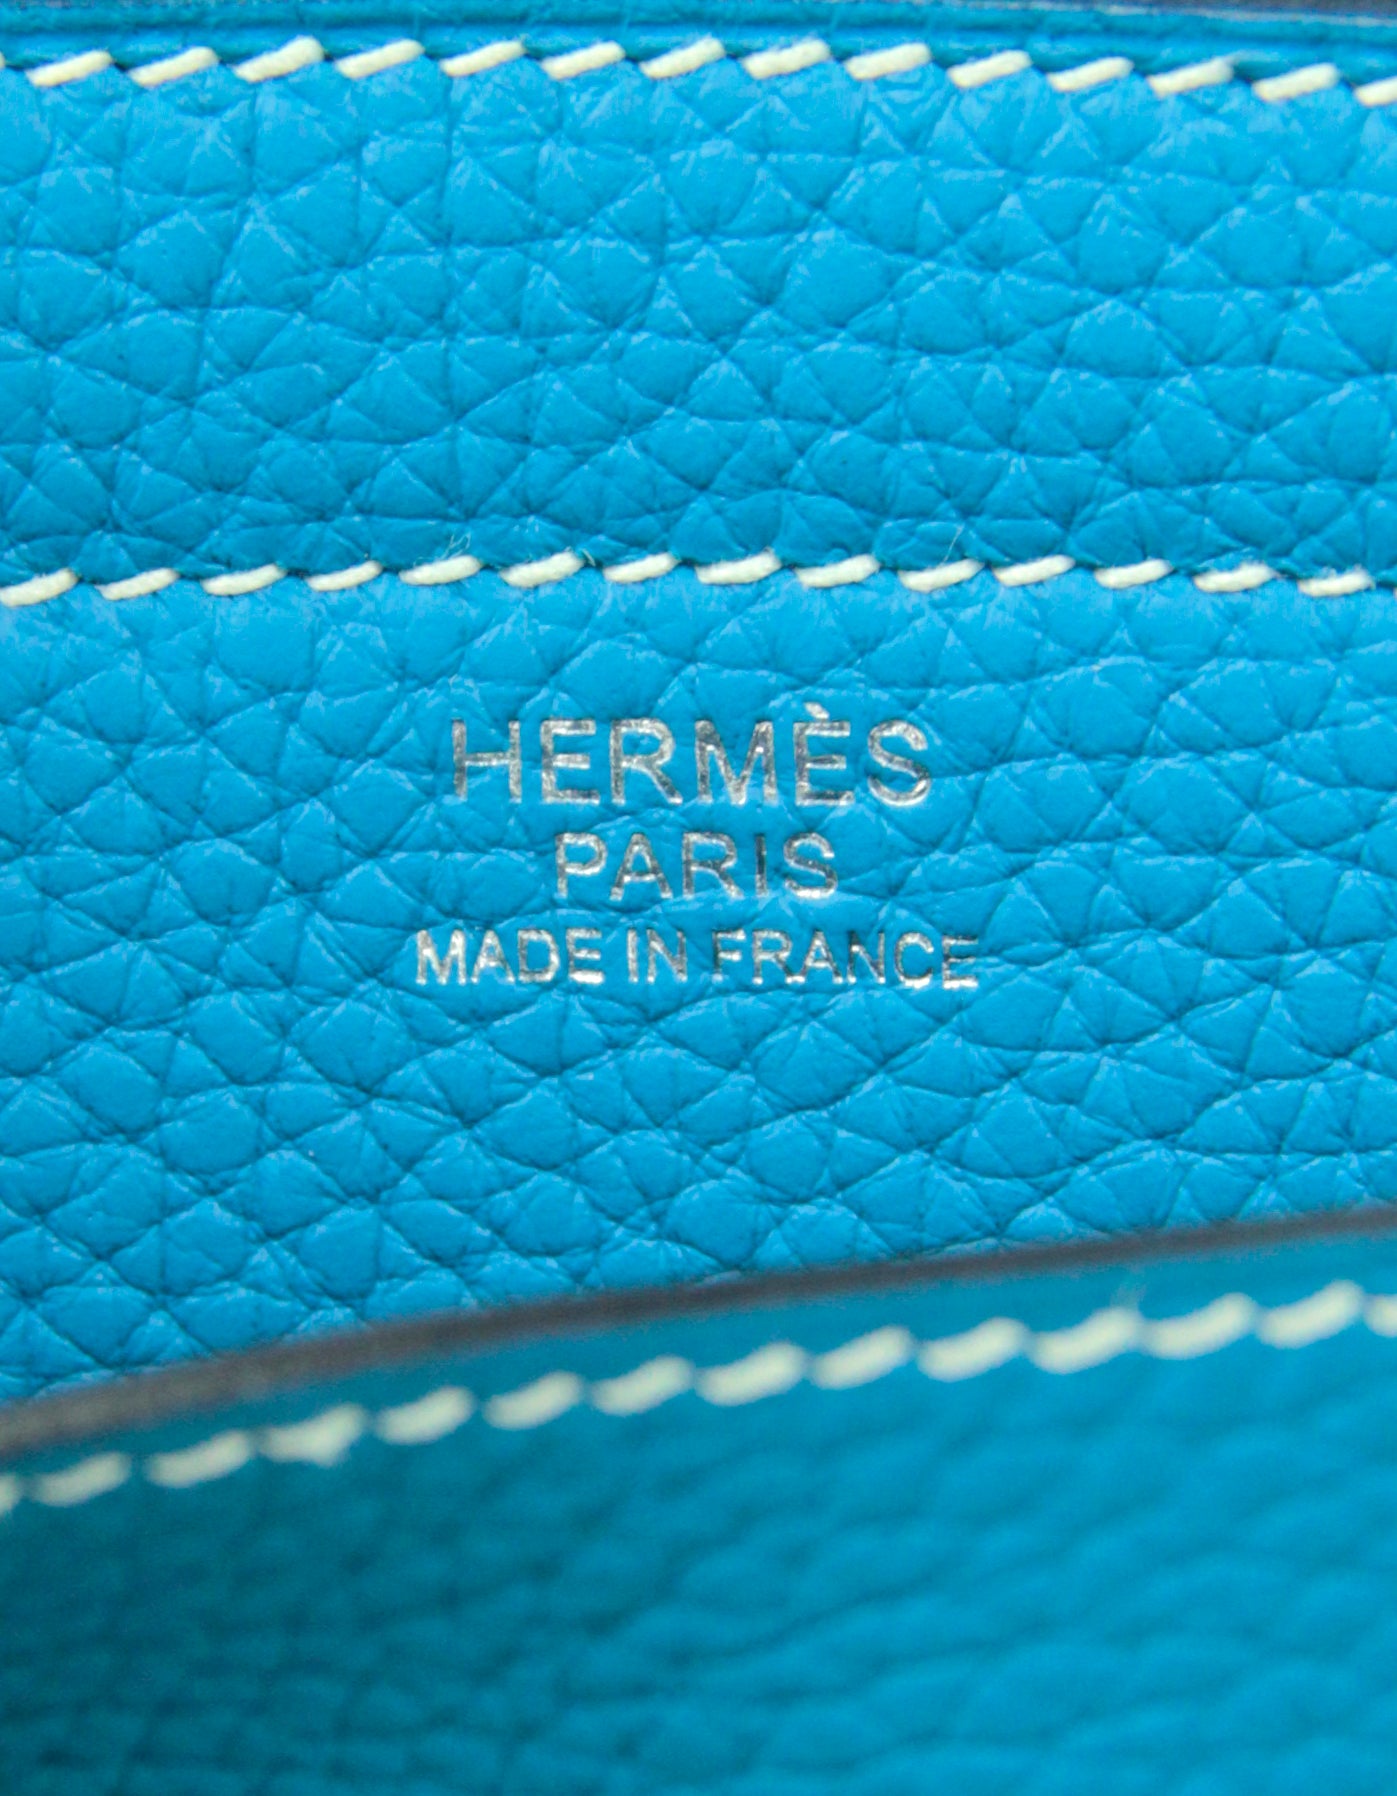 Hermes Blue Taurillon Clemence Leather Cabasellier 31 Tote Bag – ASC Resale